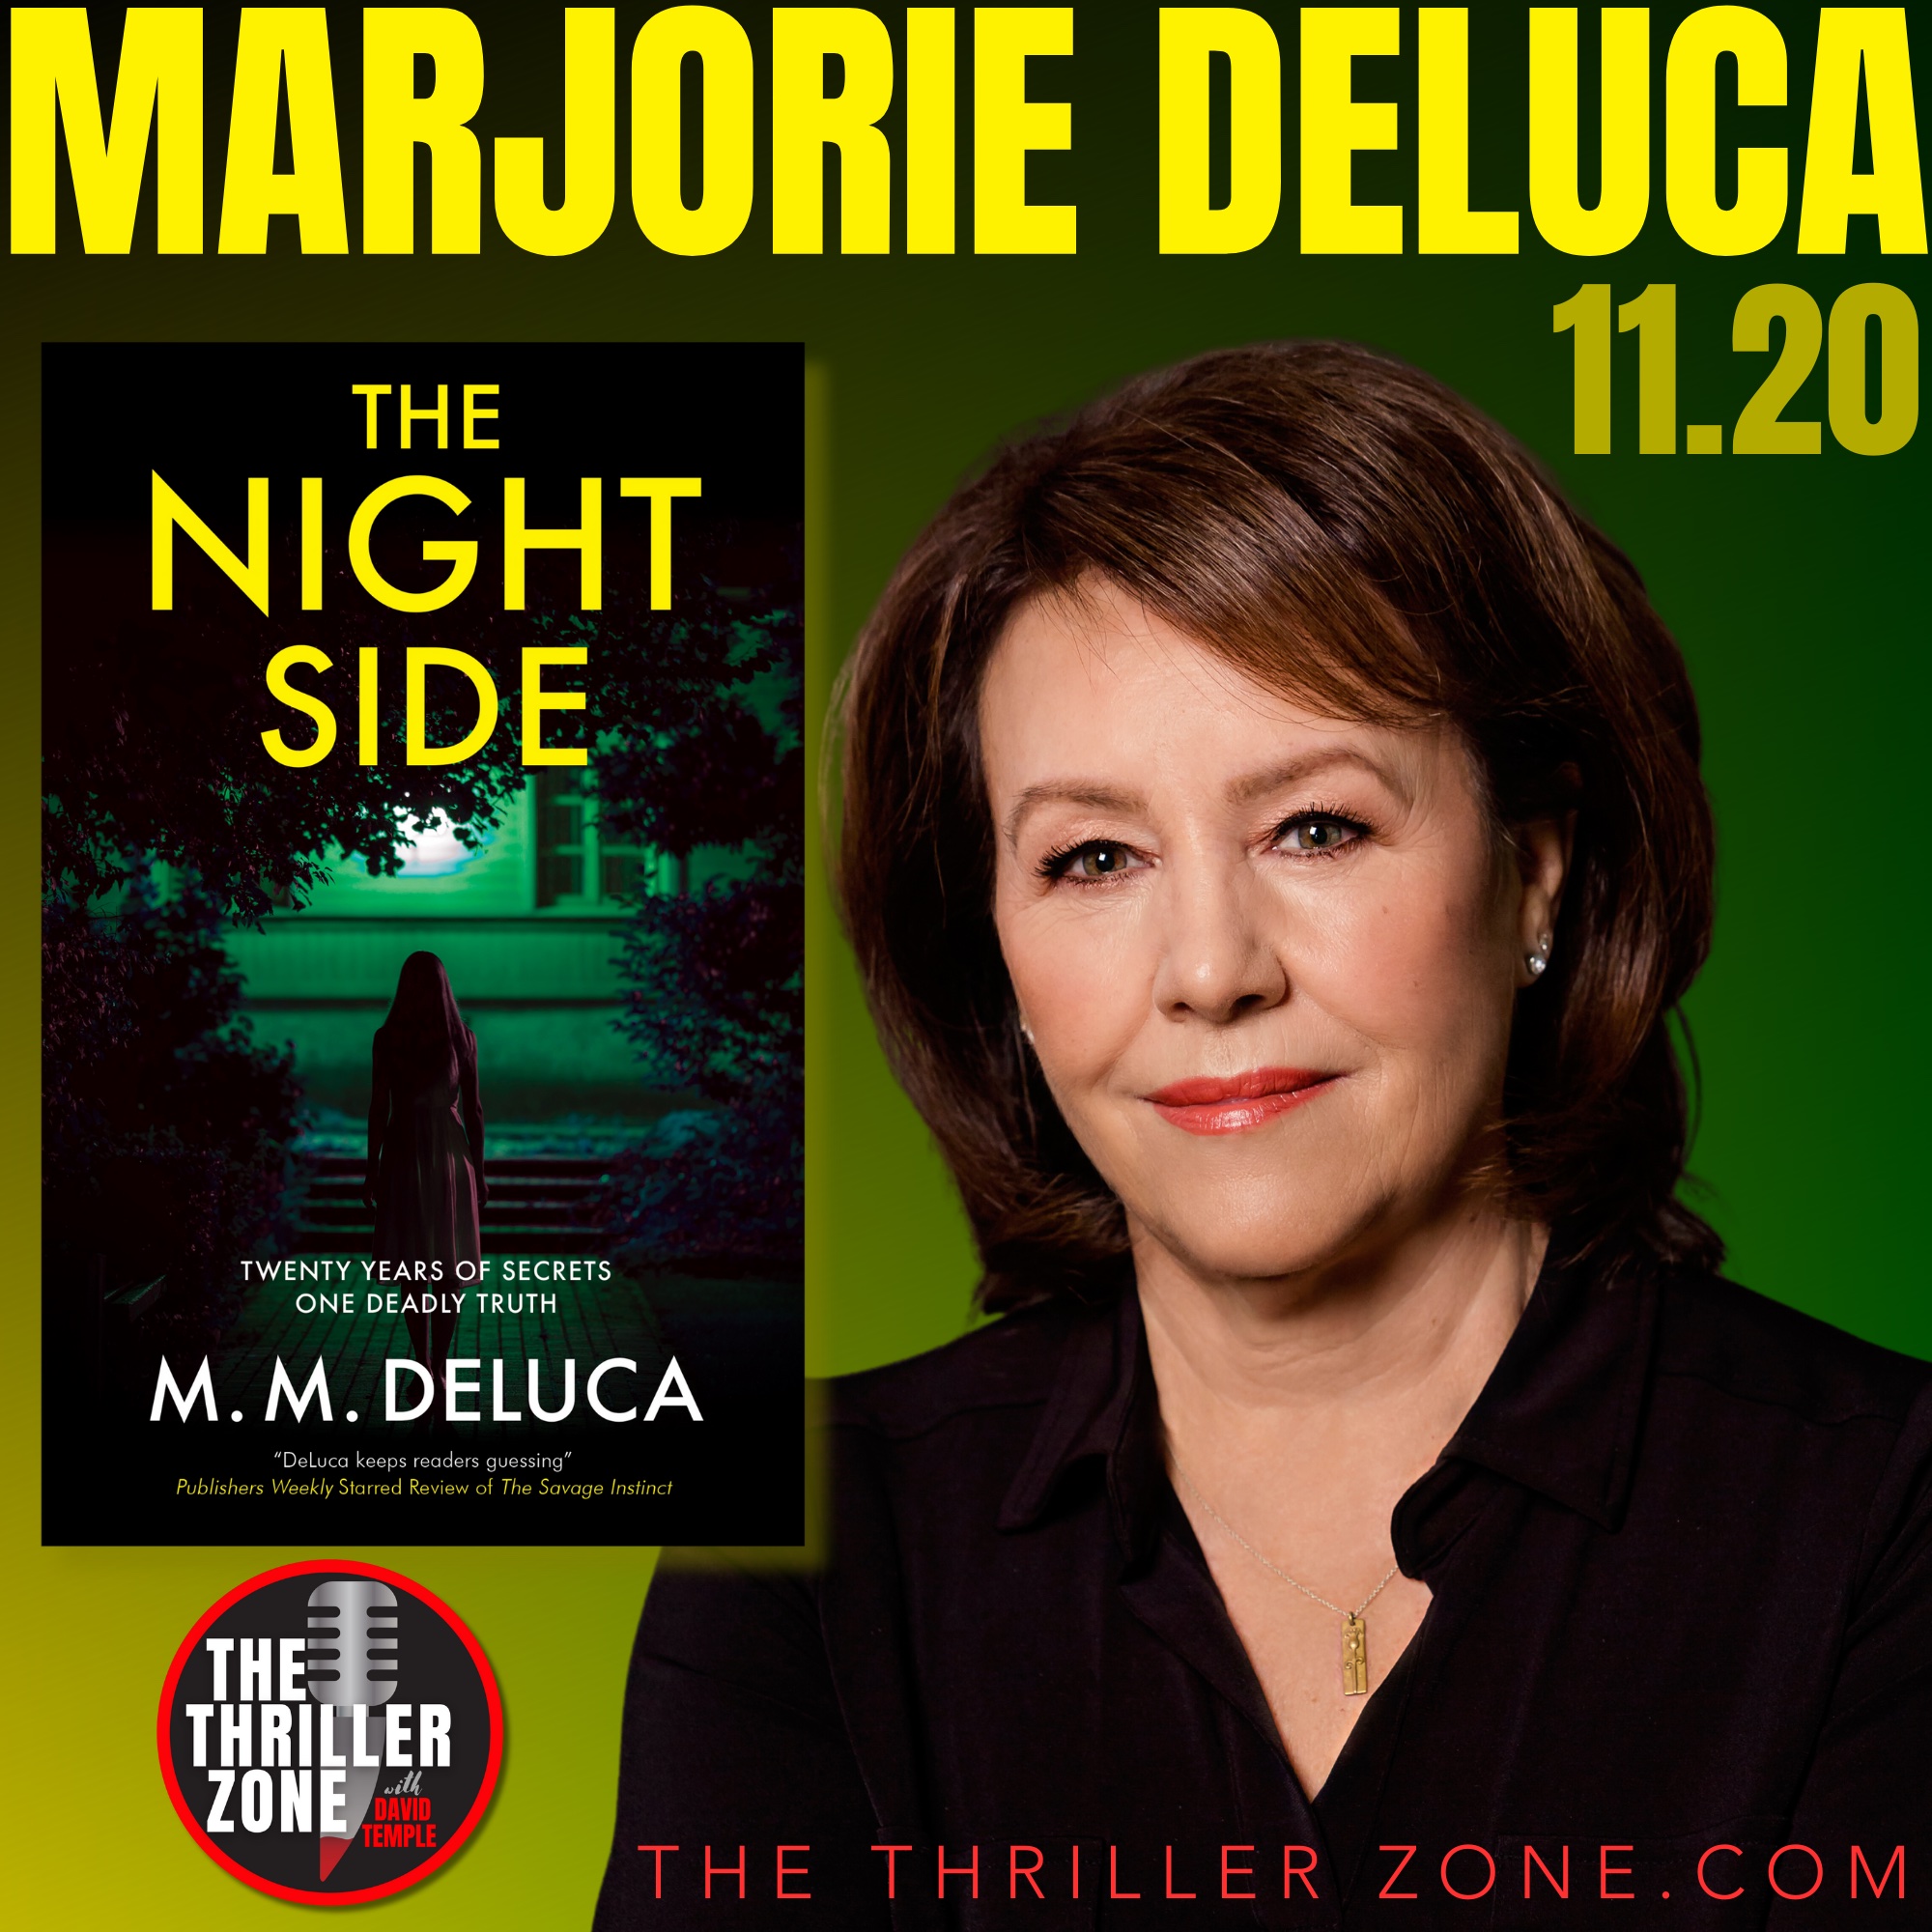 M.M. DELUCA will appear on popular podcast THE THRILLER ZONE to talk about her book THE NIGHT SIDE